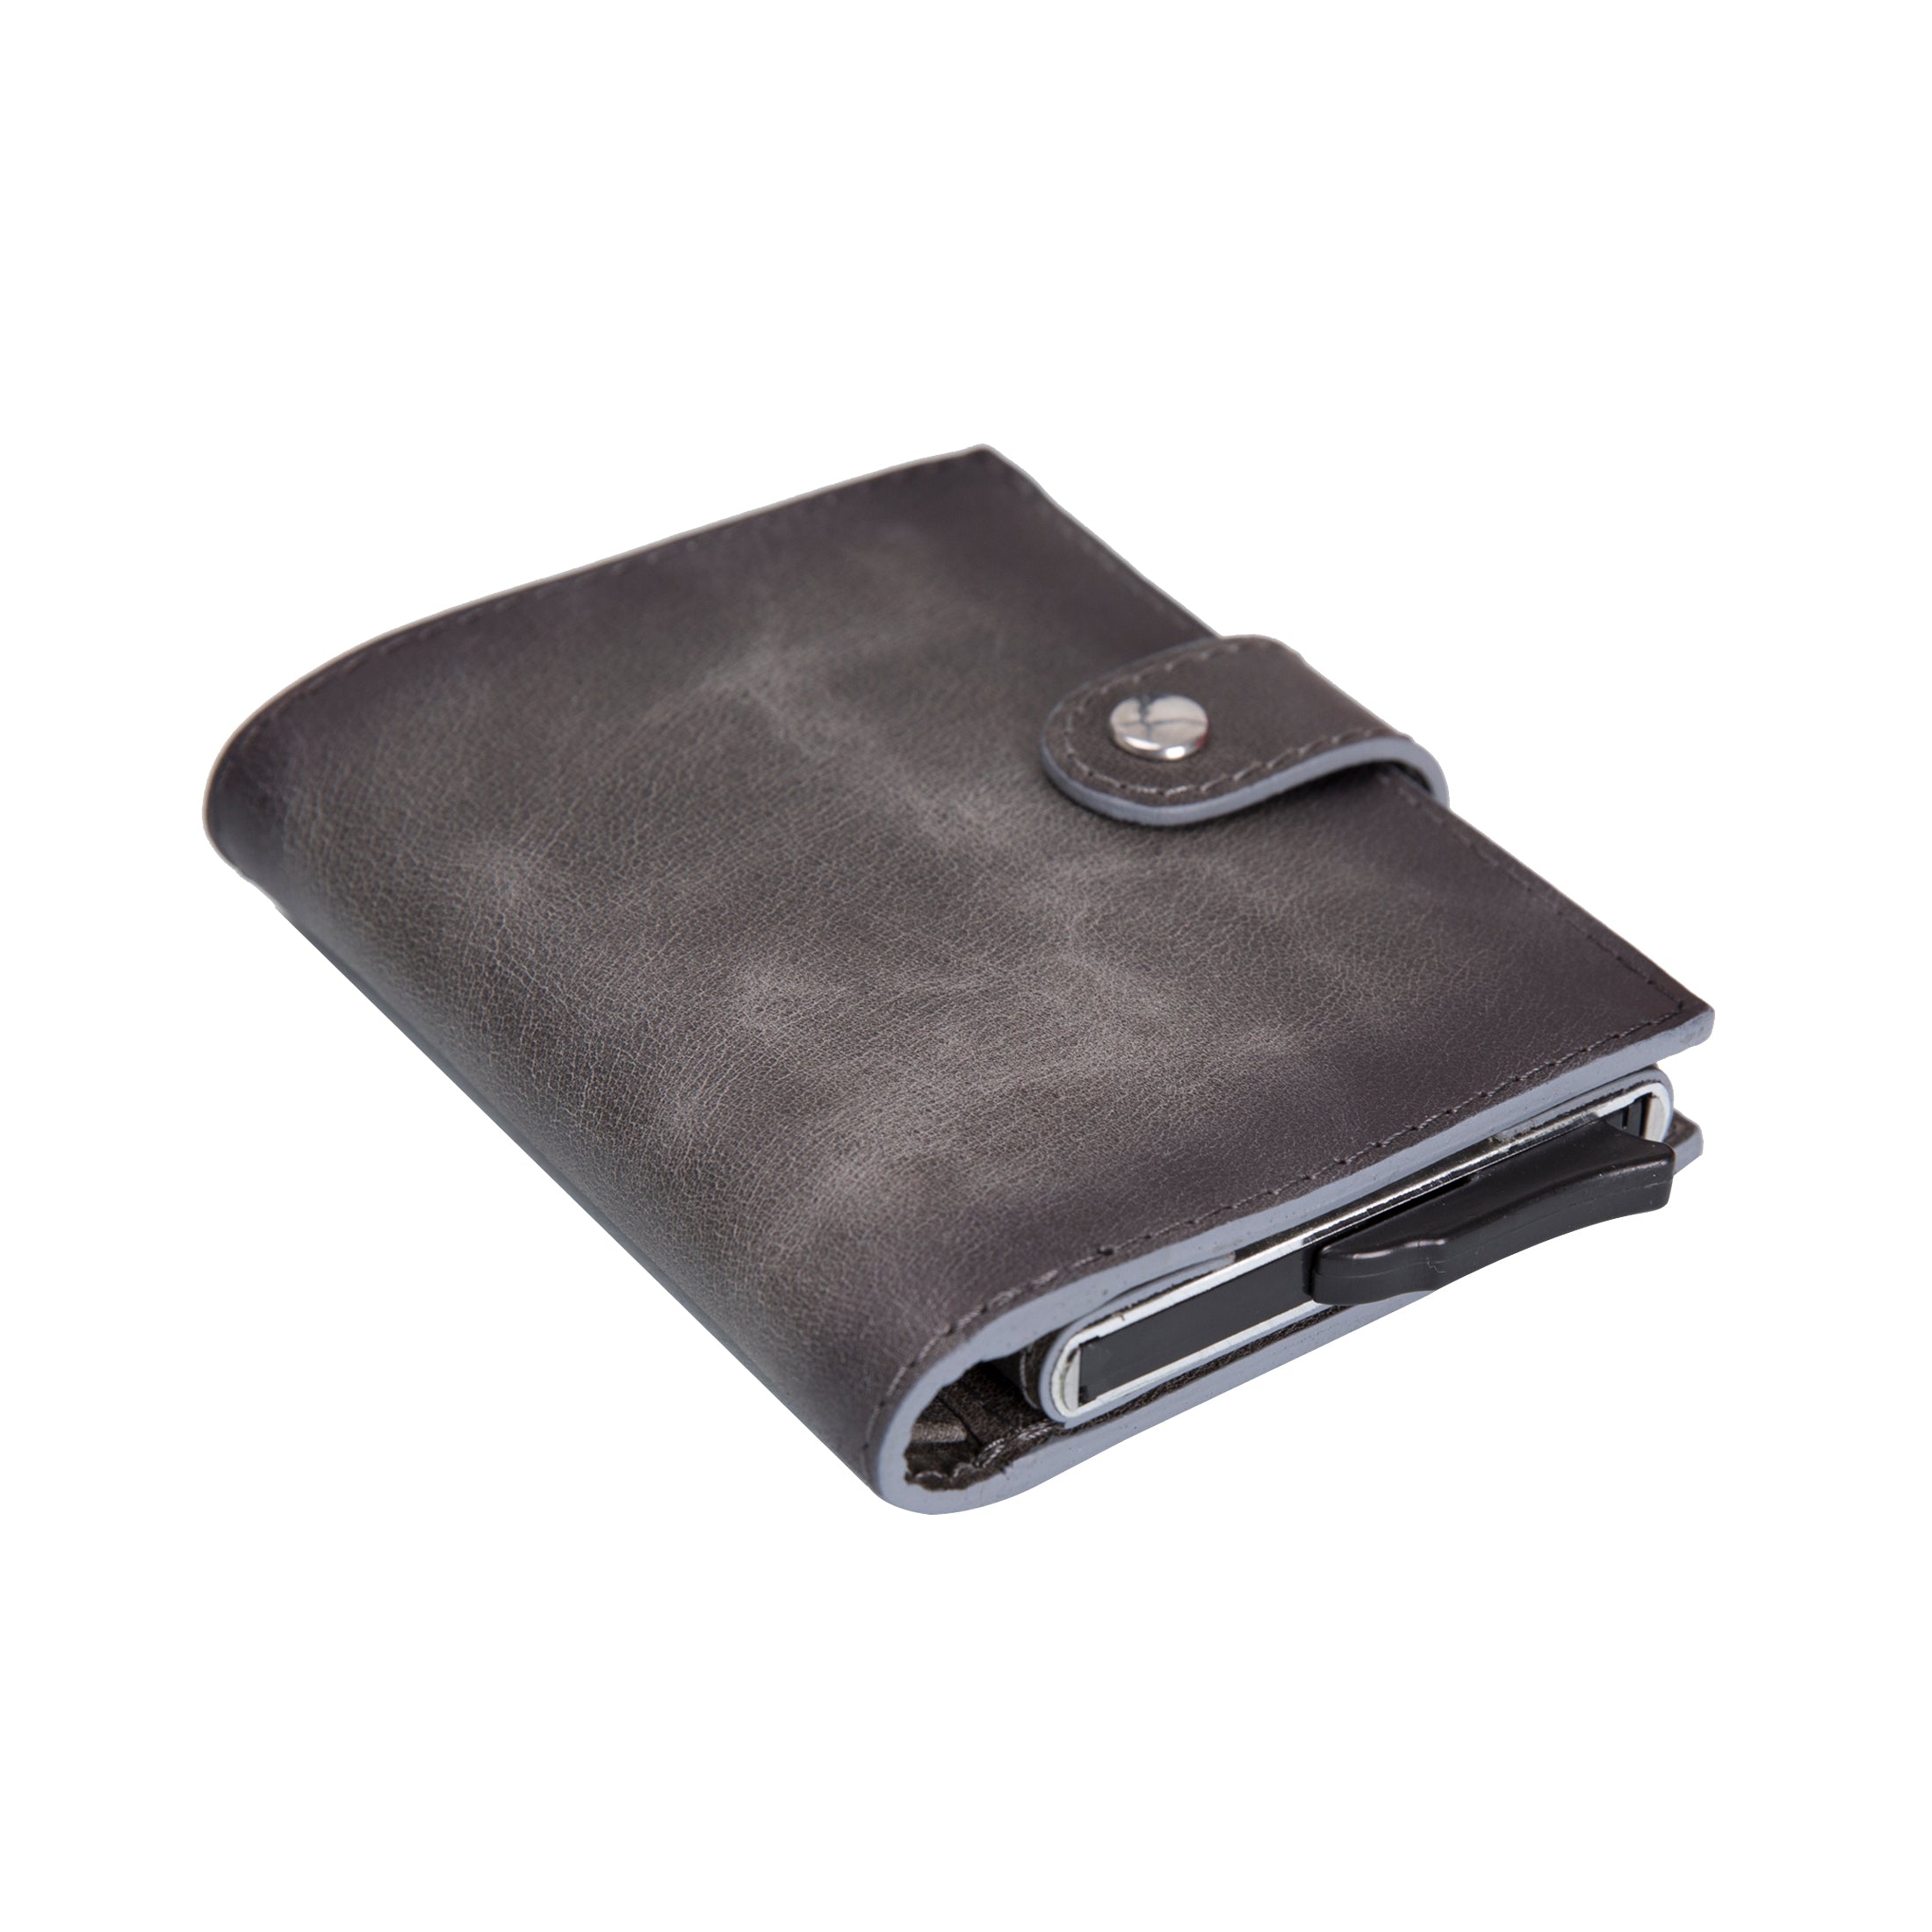 Palermo RFID Blocker Mechanism Pop Up Leather Wallet - GRAY - saracleather